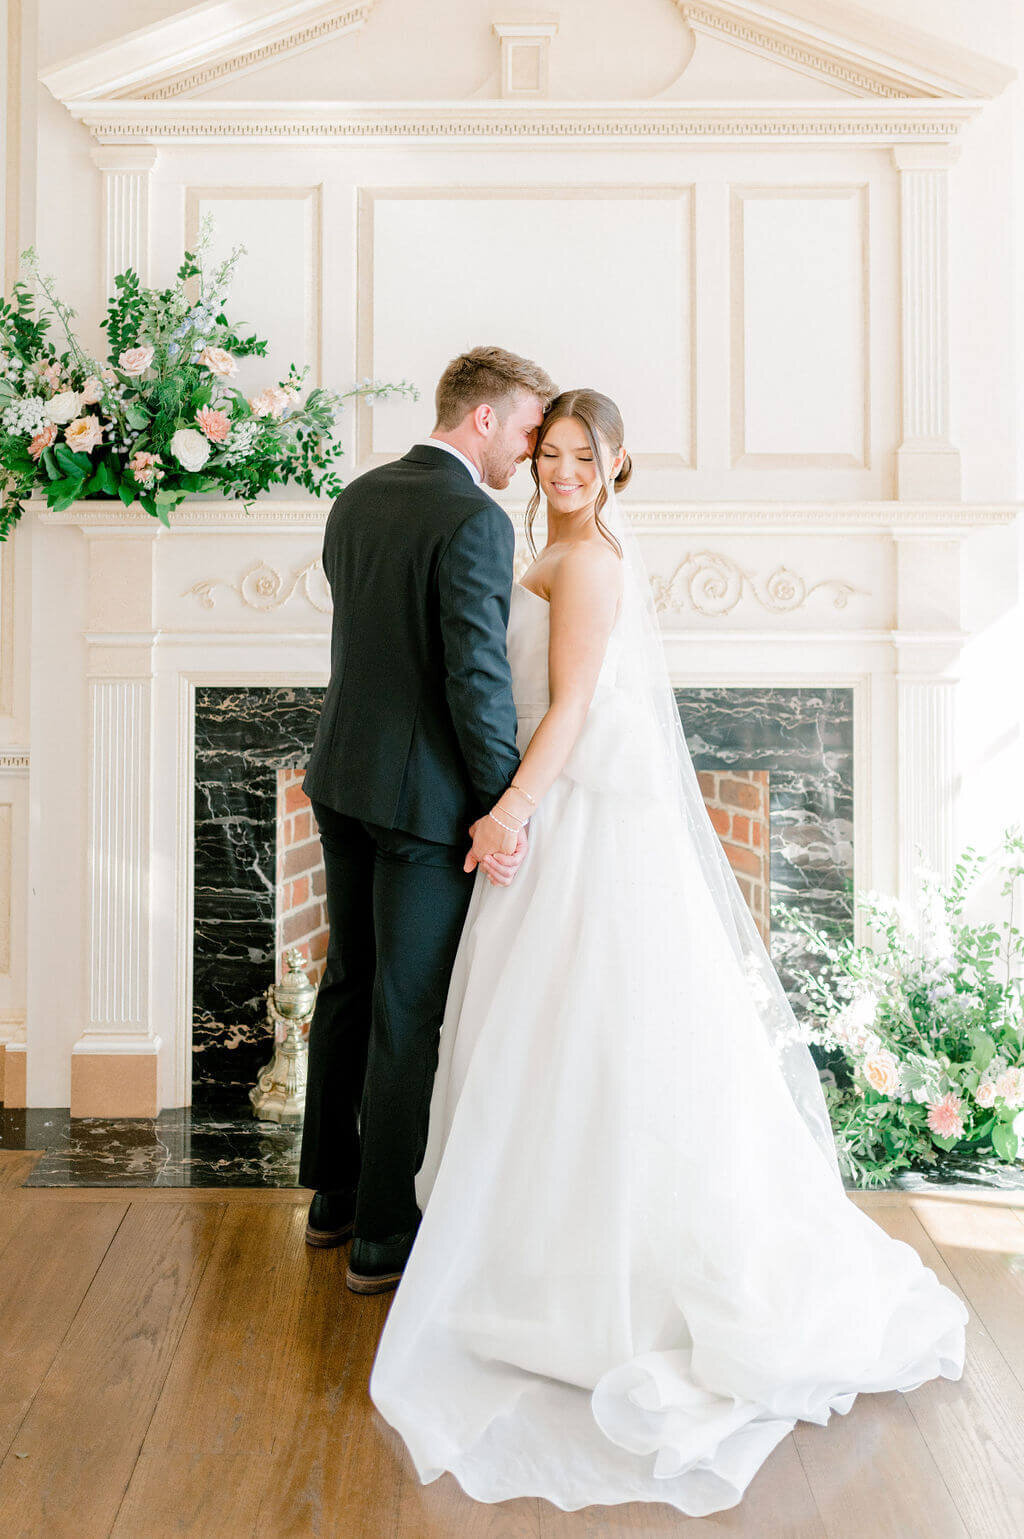 Couple nuzzling in front of fireplace for wedding photography